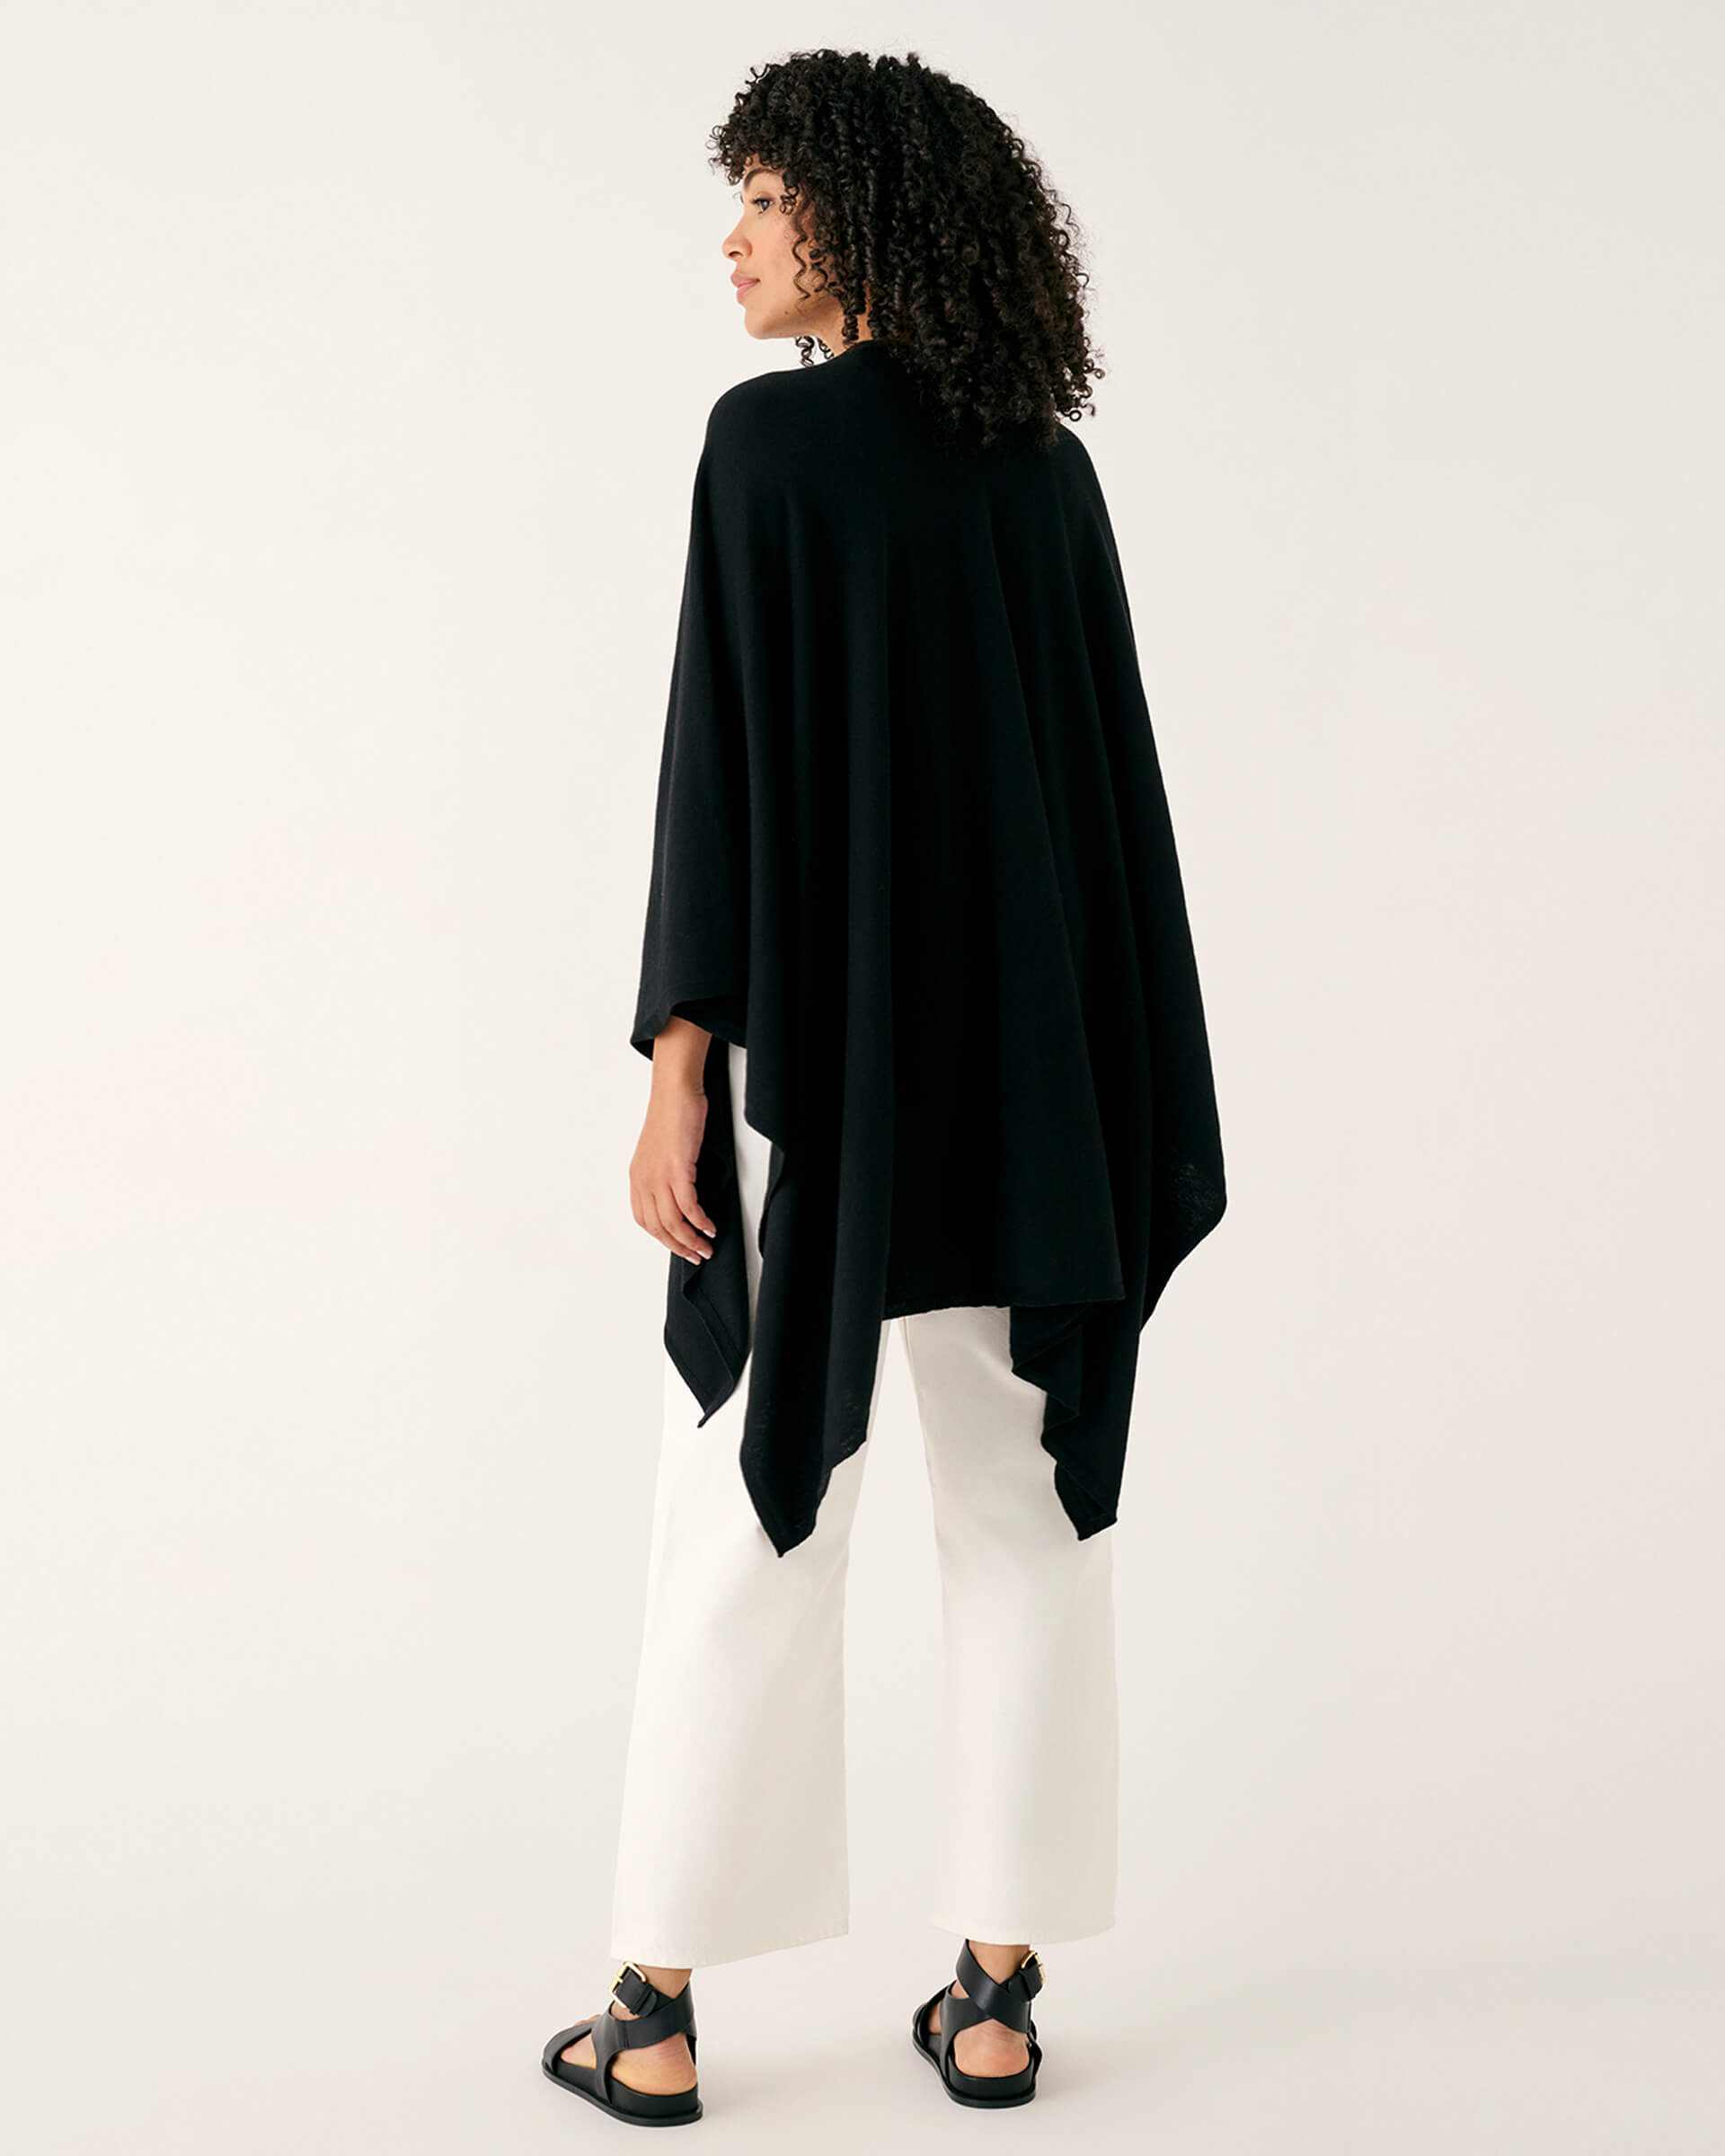 rearview of woman wearing mersea black charleston cotton cashmere wrap standing on a white background